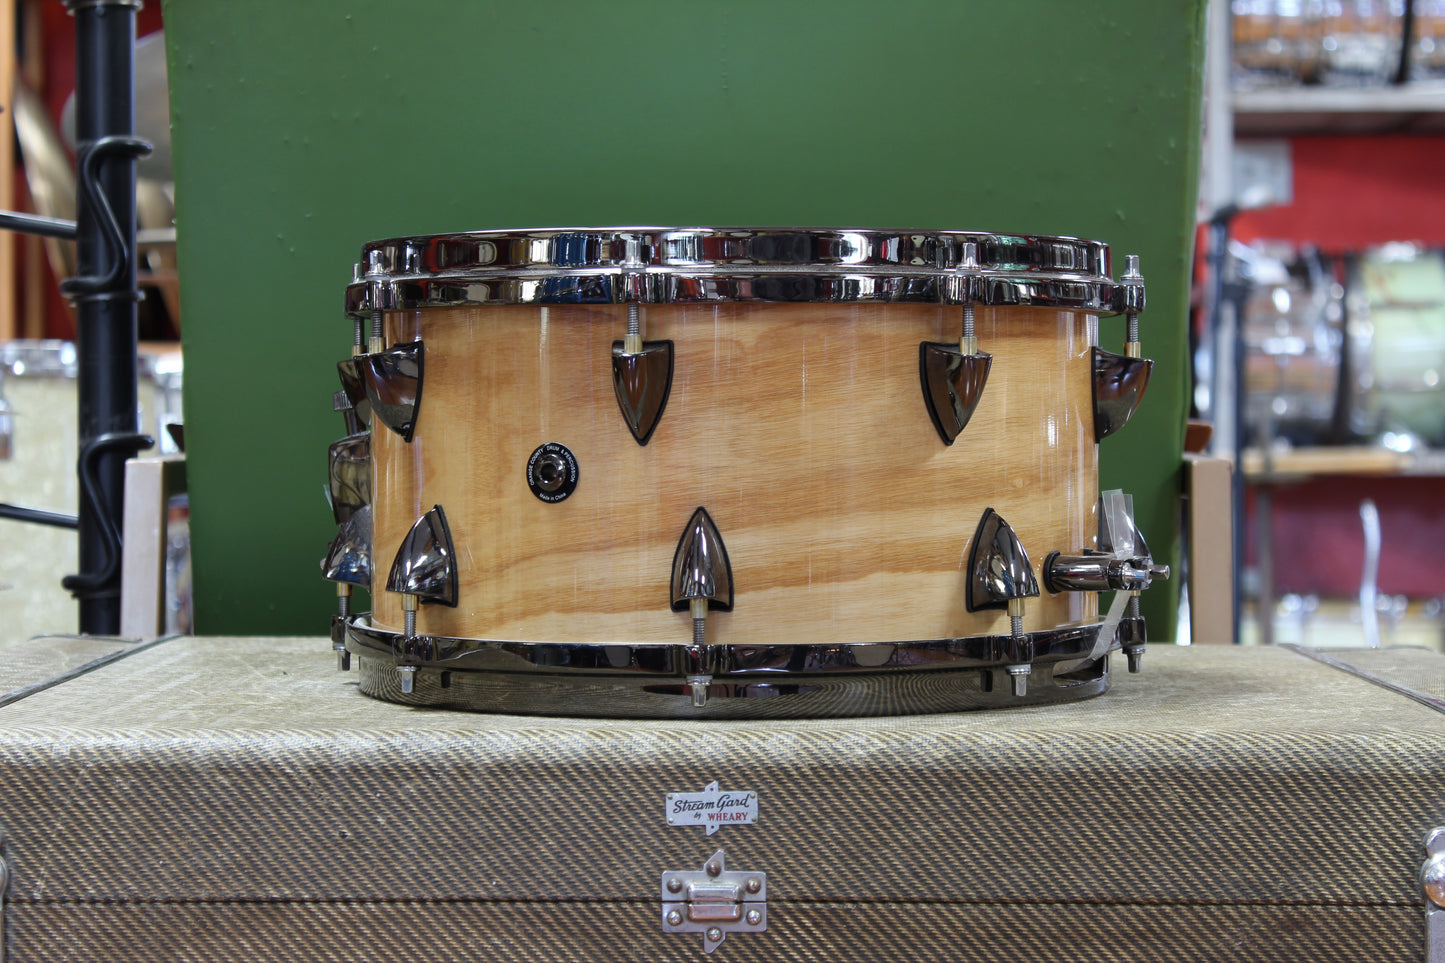 Used Orange County Drums & Percussion Maple Ash Snare Drum 7X13 in Natural Gloss